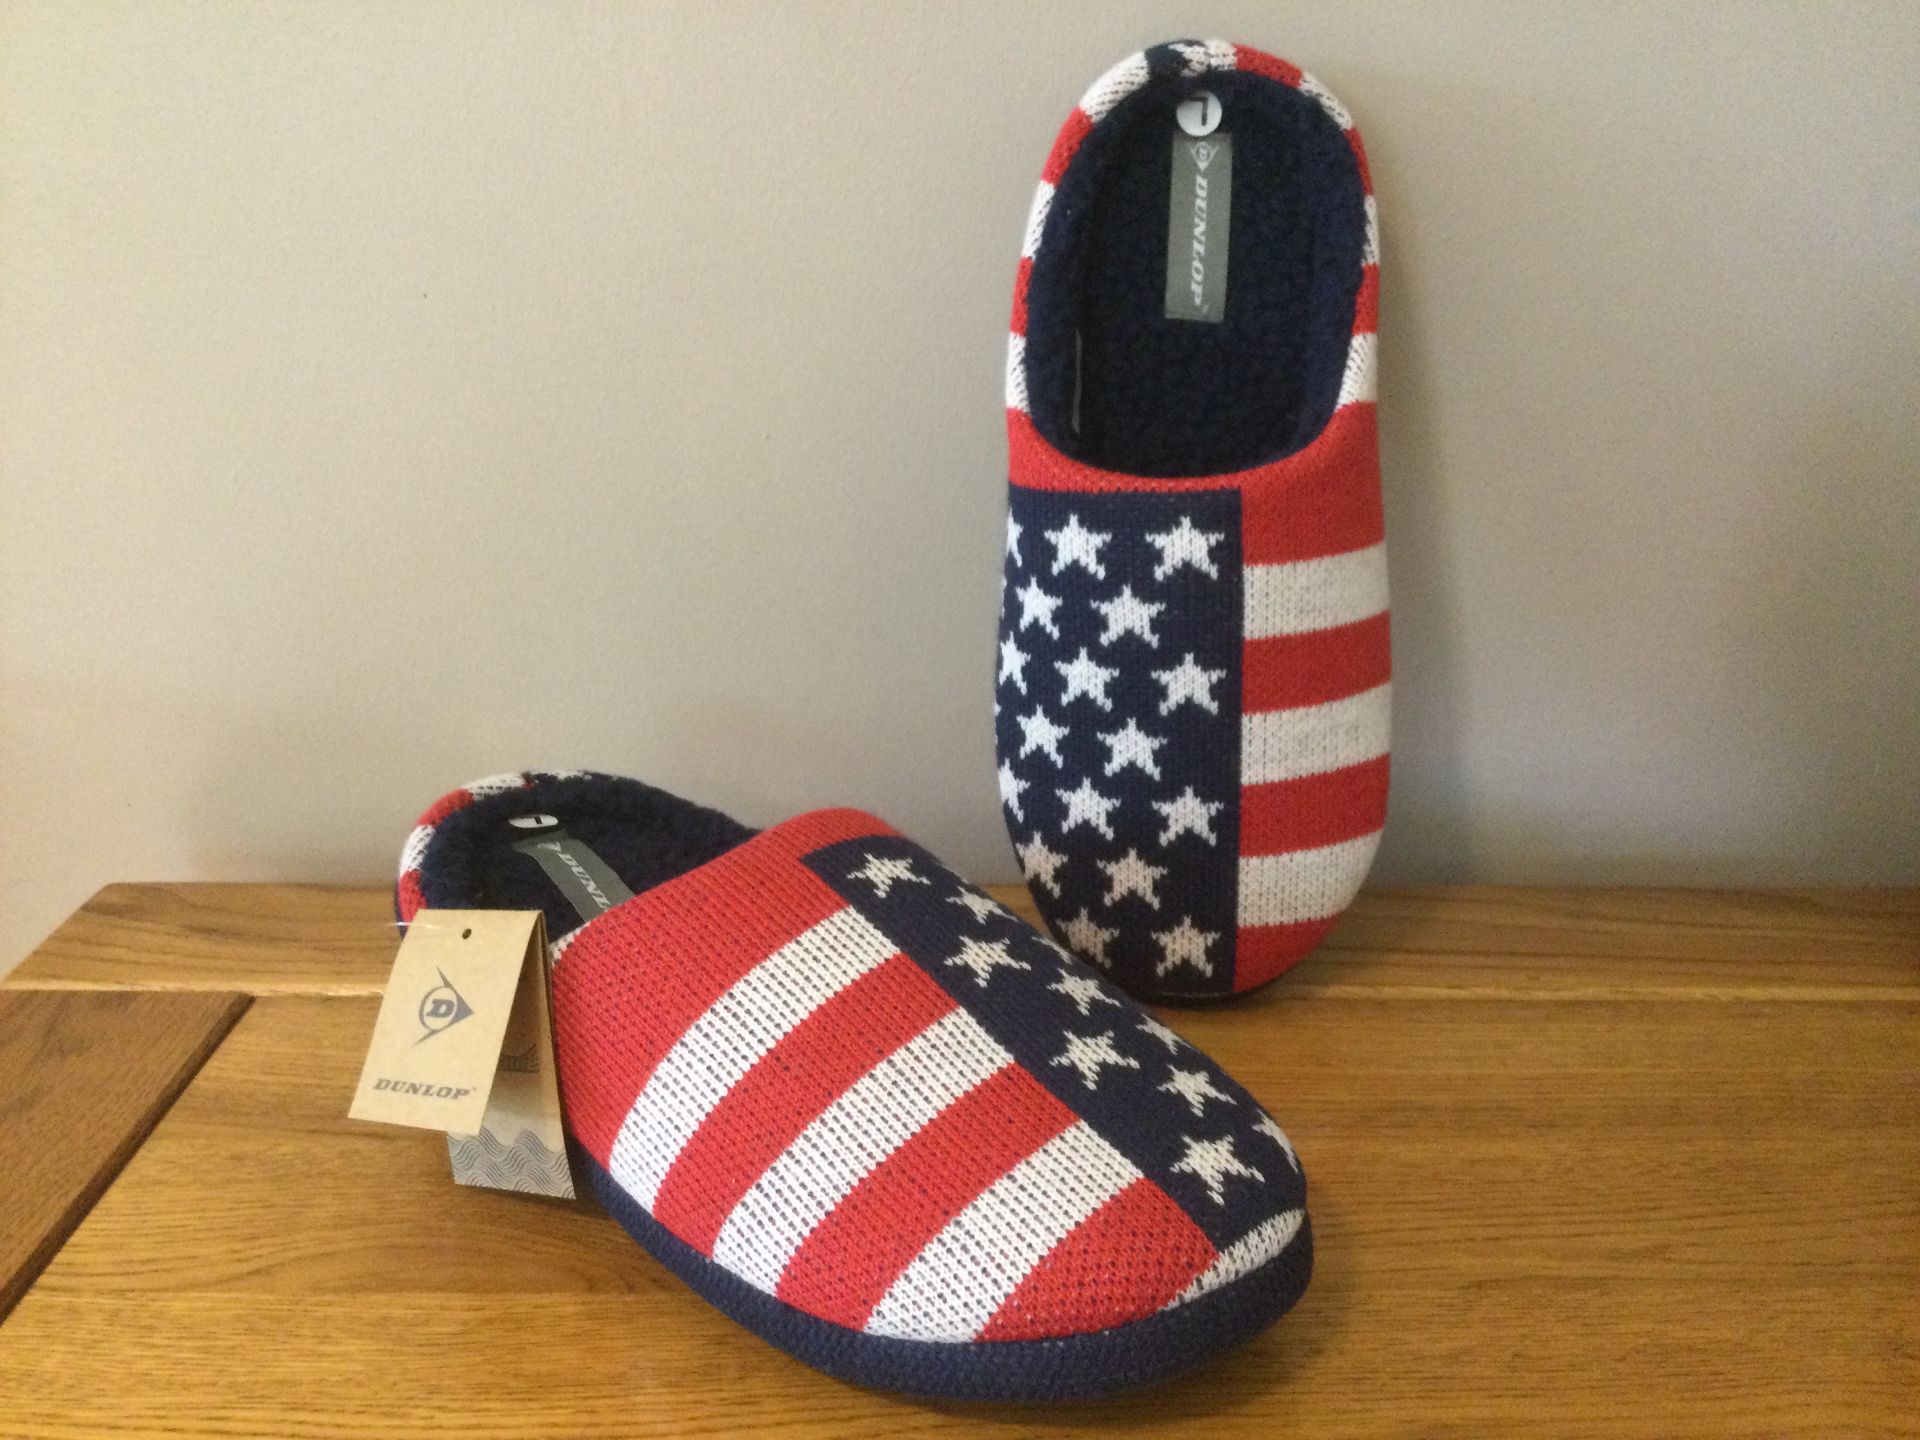 Men's Dunlop, “USA Stars and Stripes” Memory Foam, Mule Slippers, Size L (10/11) - New - Image 3 of 5